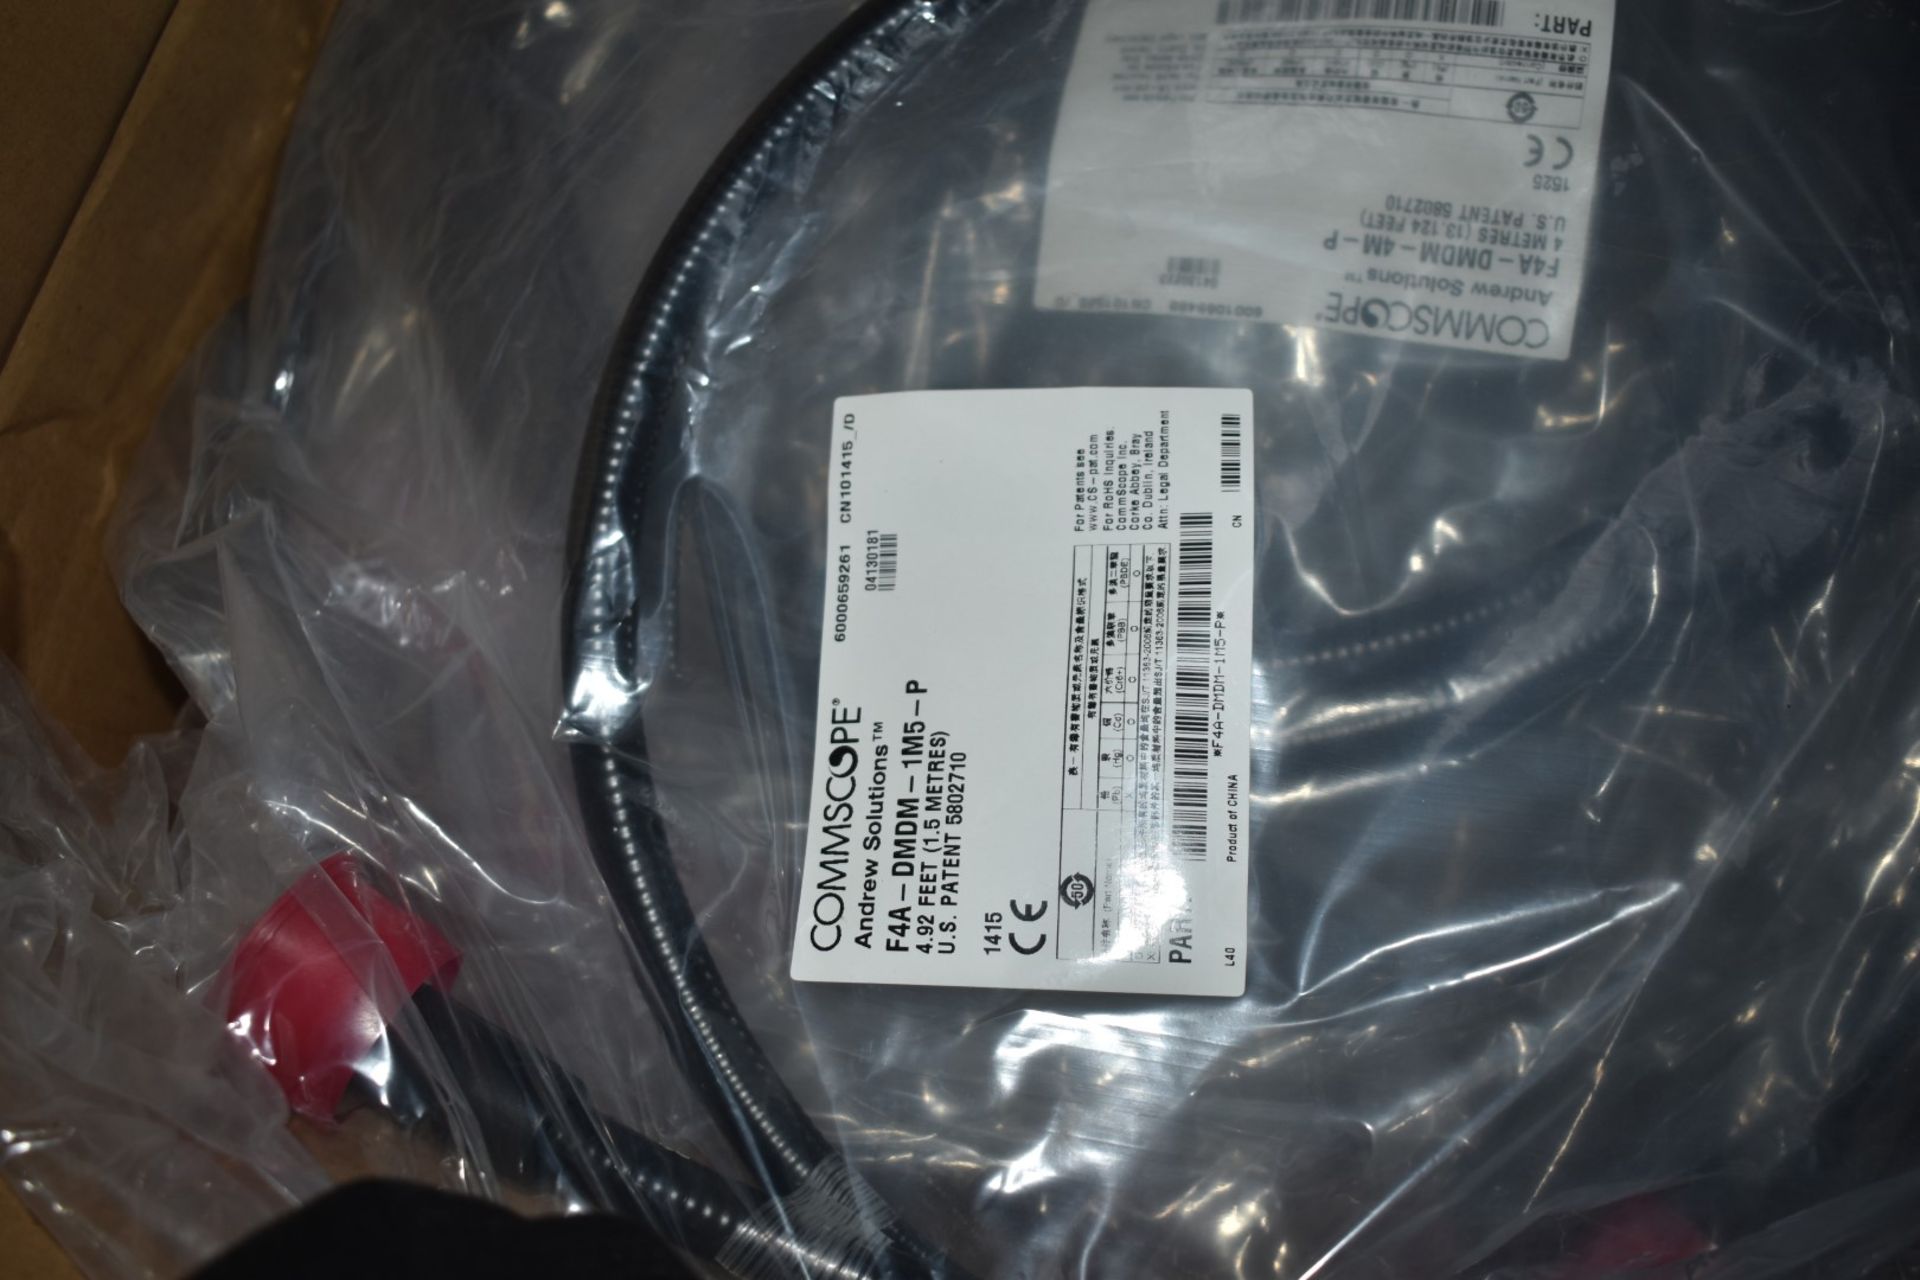 22 x Commscope Heliax Superflexible SureFlex Jumper Cables With Interfaces - Brand New - Type F4A- - Image 2 of 5